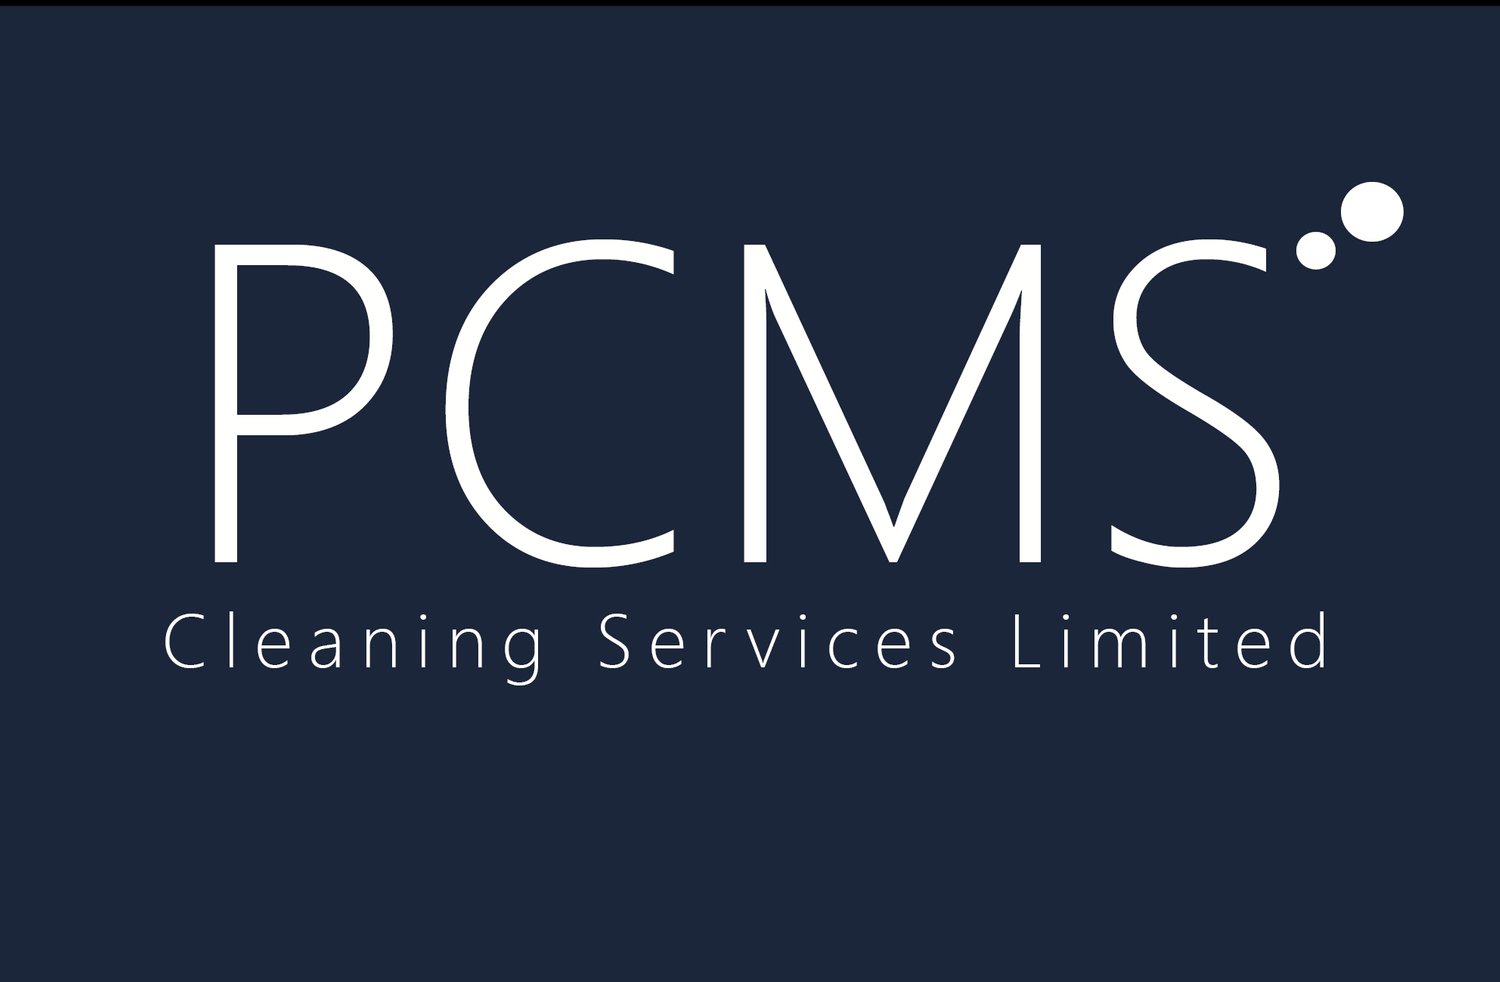 PCMS Cleaning Services Ltd